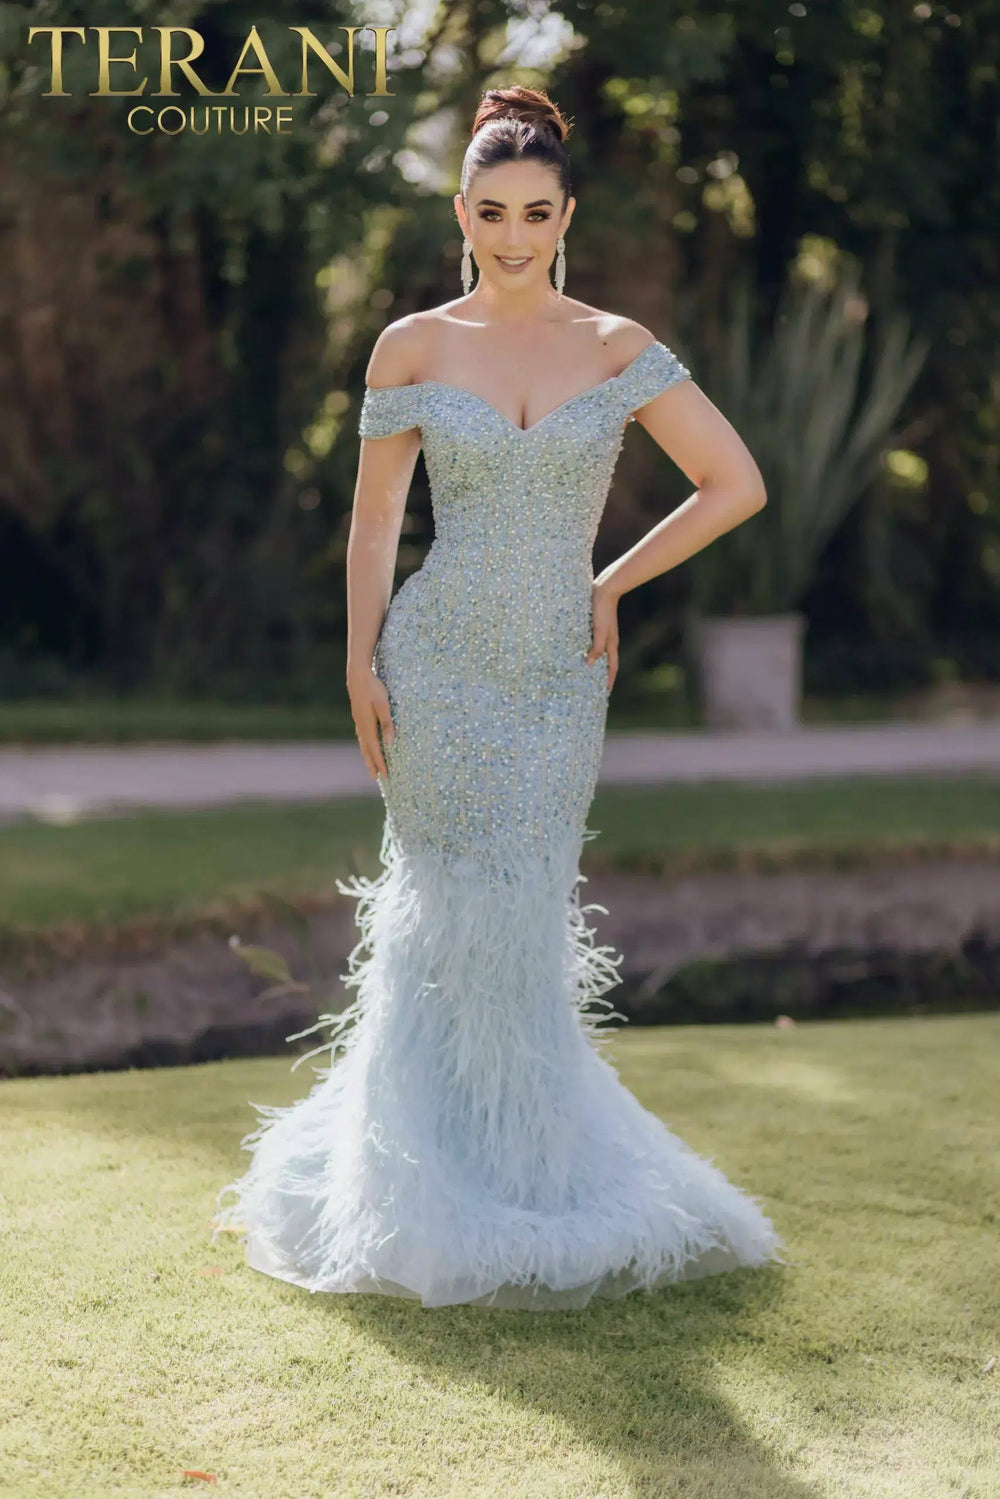 terani couture evening dress Terani Couture 232GL1478 Mermaid Off-Shoulder Beaded Bodice Feathered Hem Long Dress